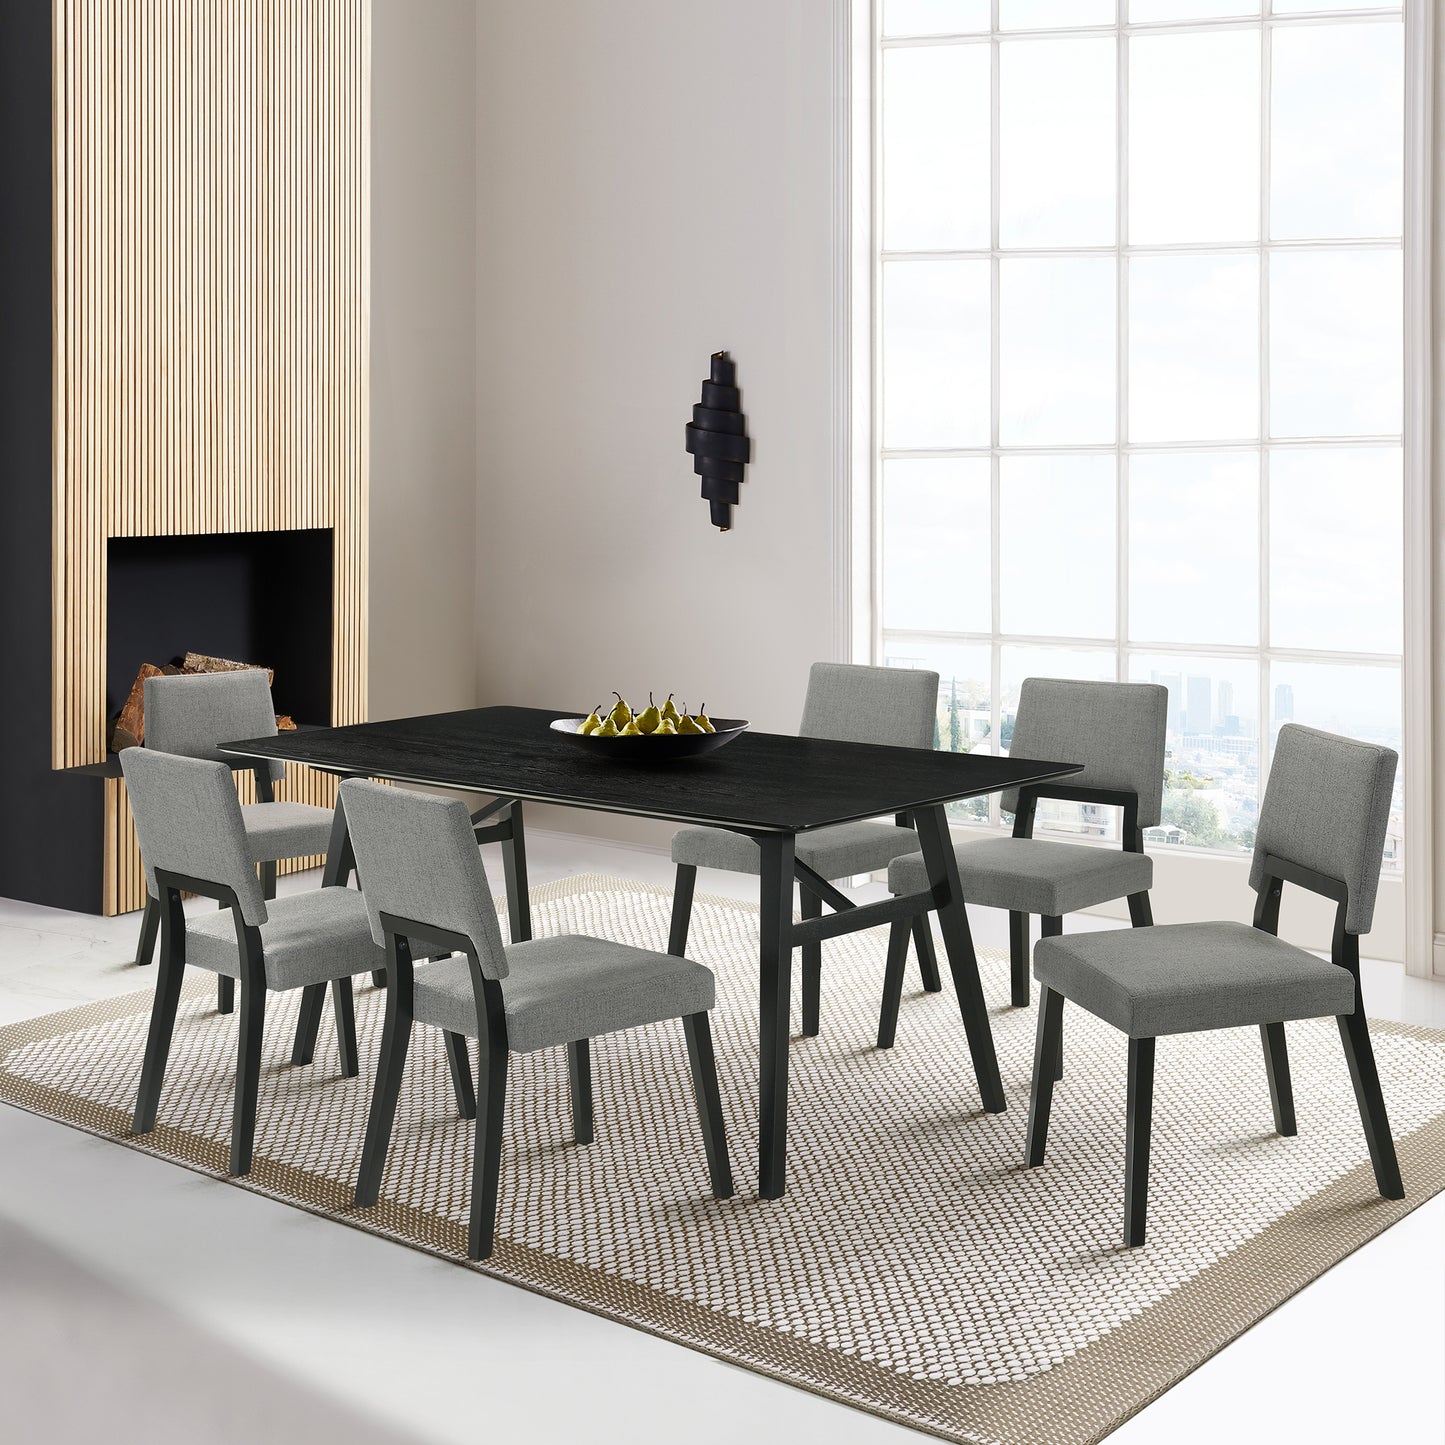 Channell 7 Piece Black Wood Dining Table Set with Charcoal Fabric